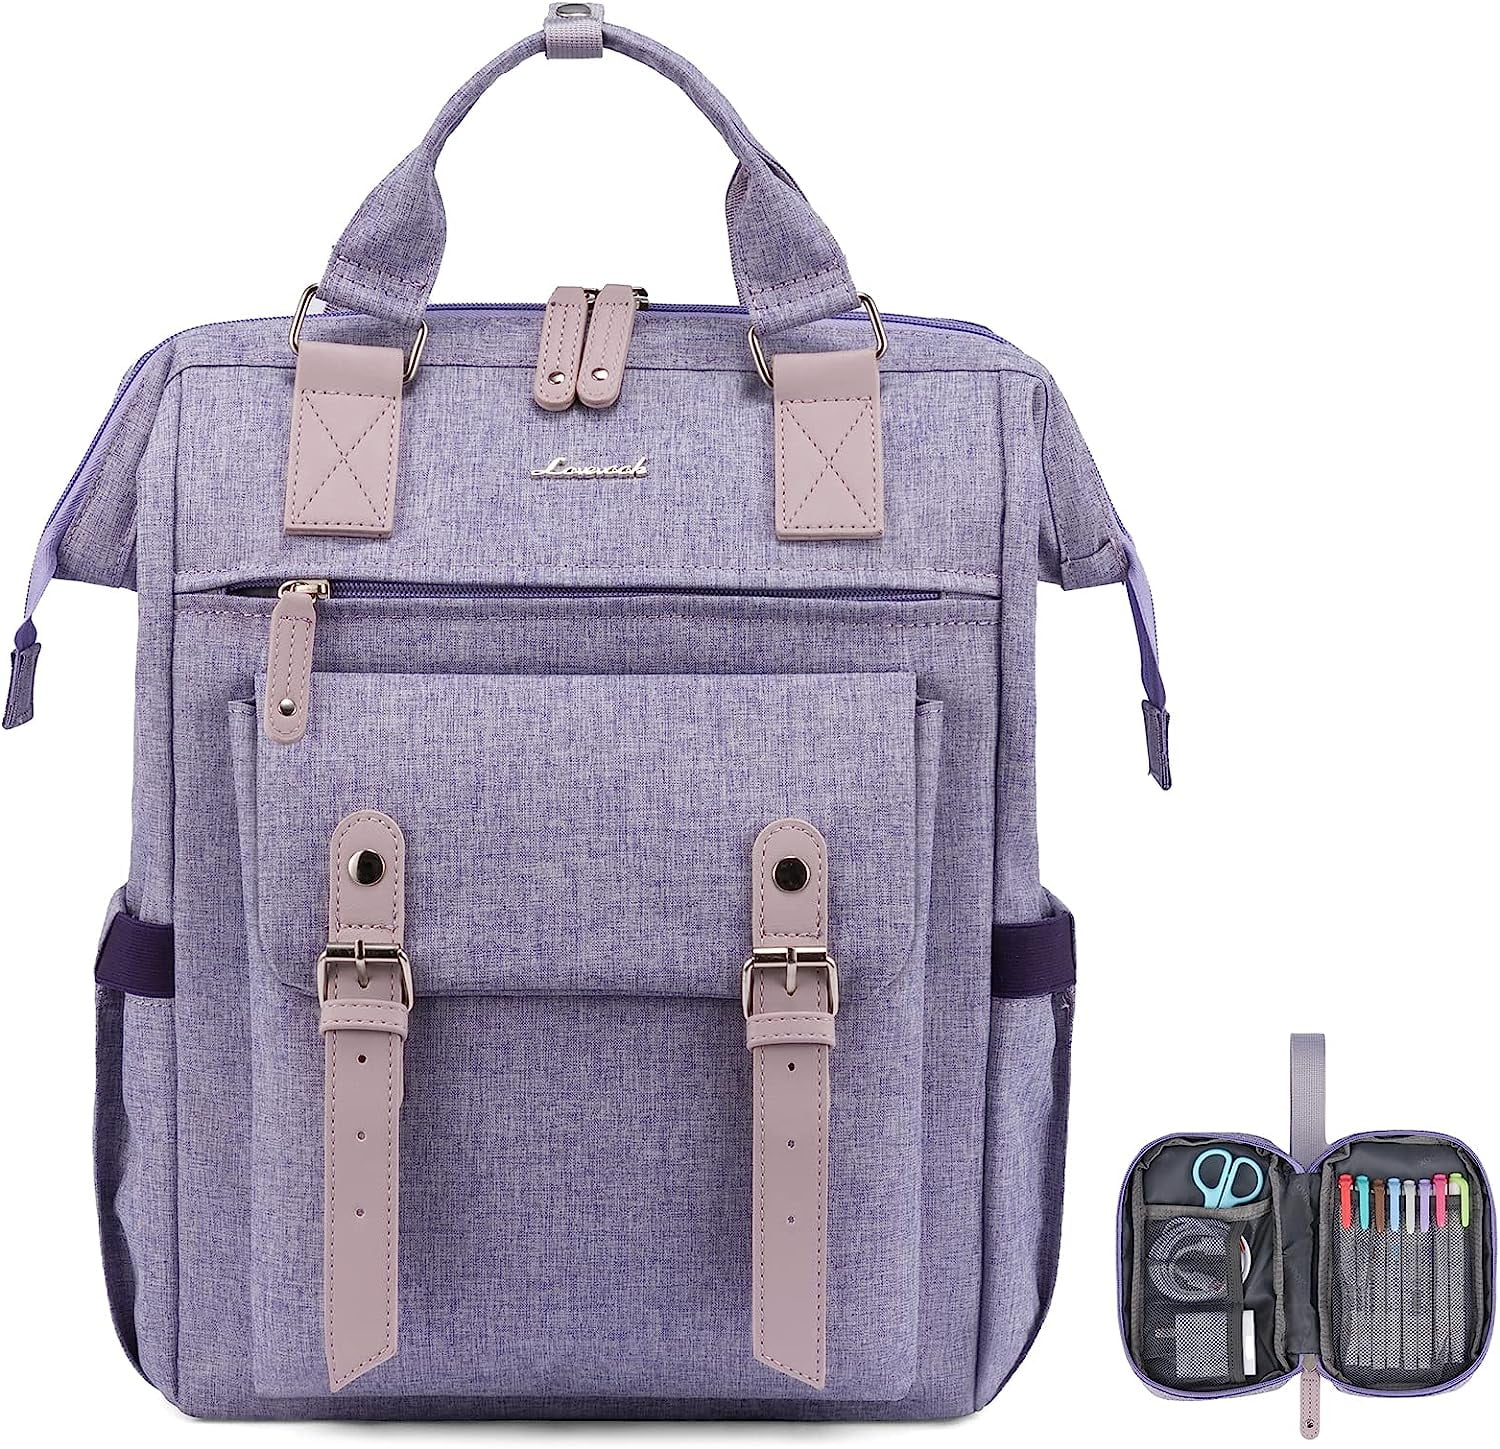 Lovevook Laptop Backpack for Women 15.6